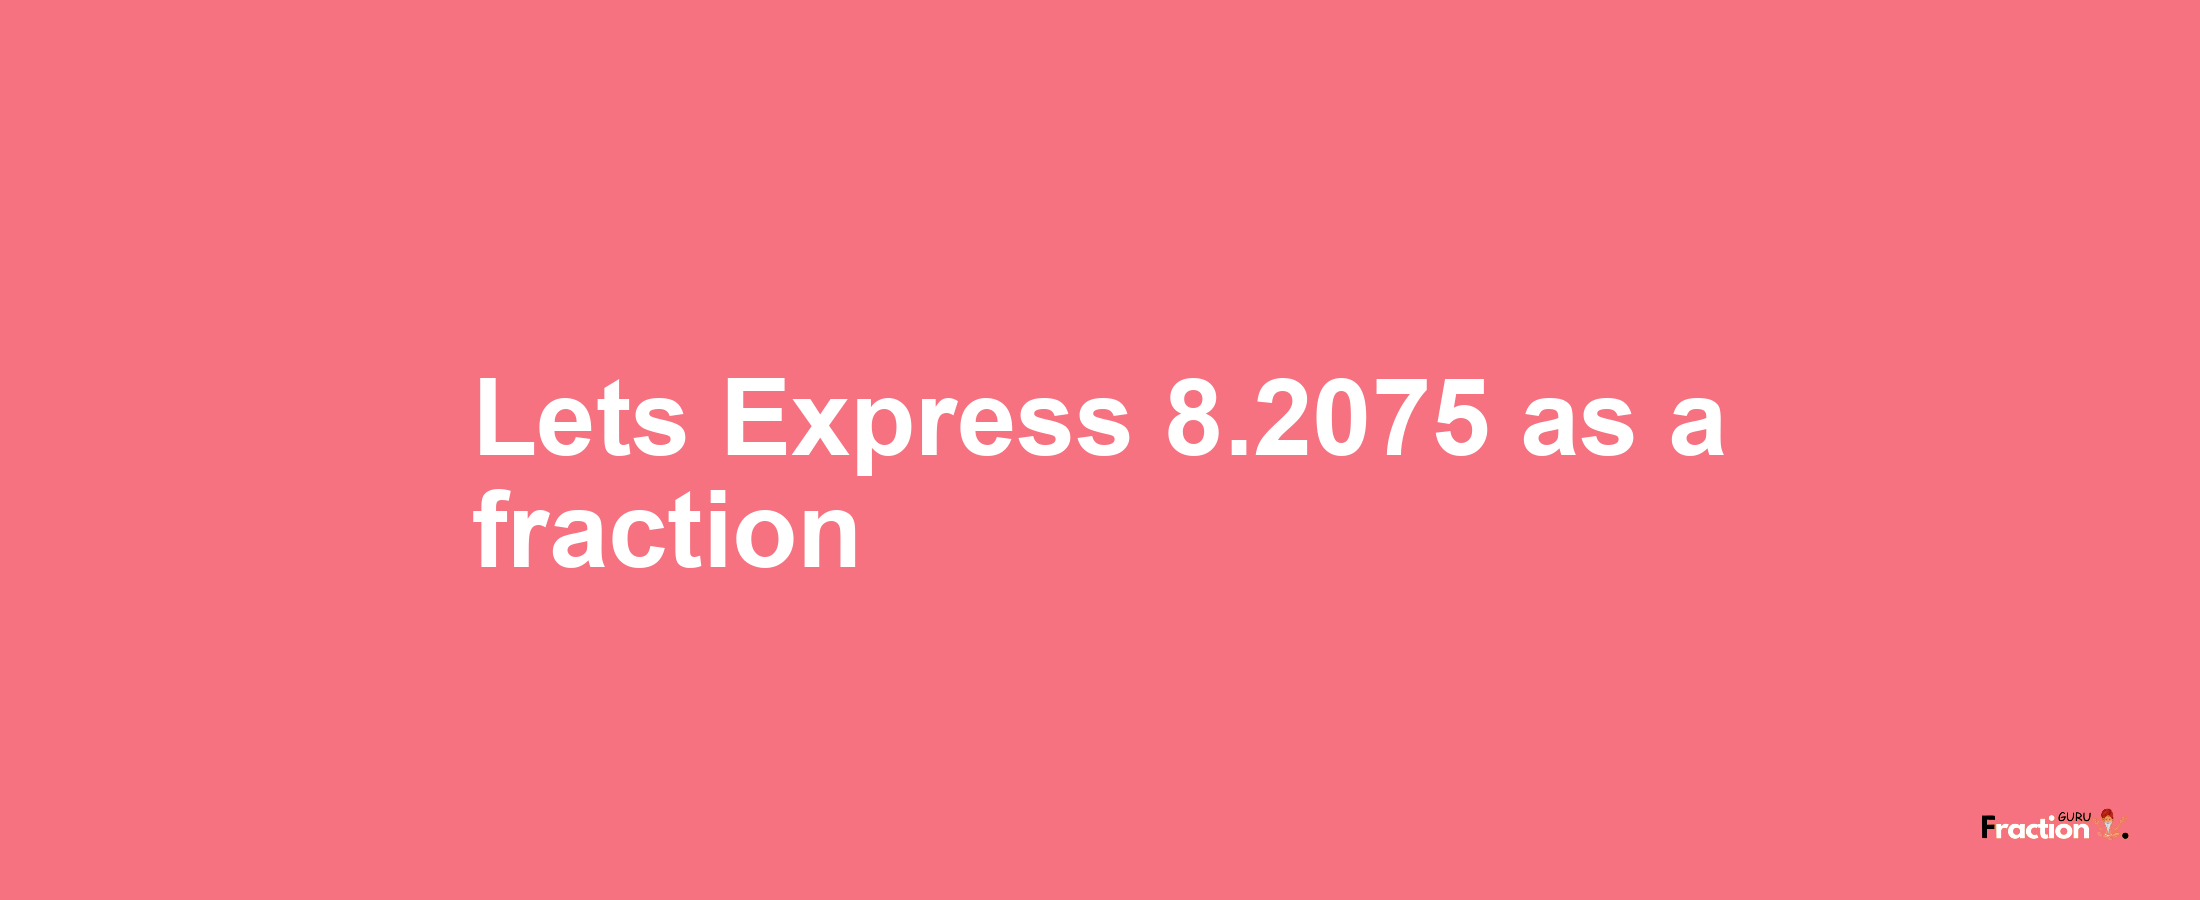 Lets Express 8.2075 as afraction